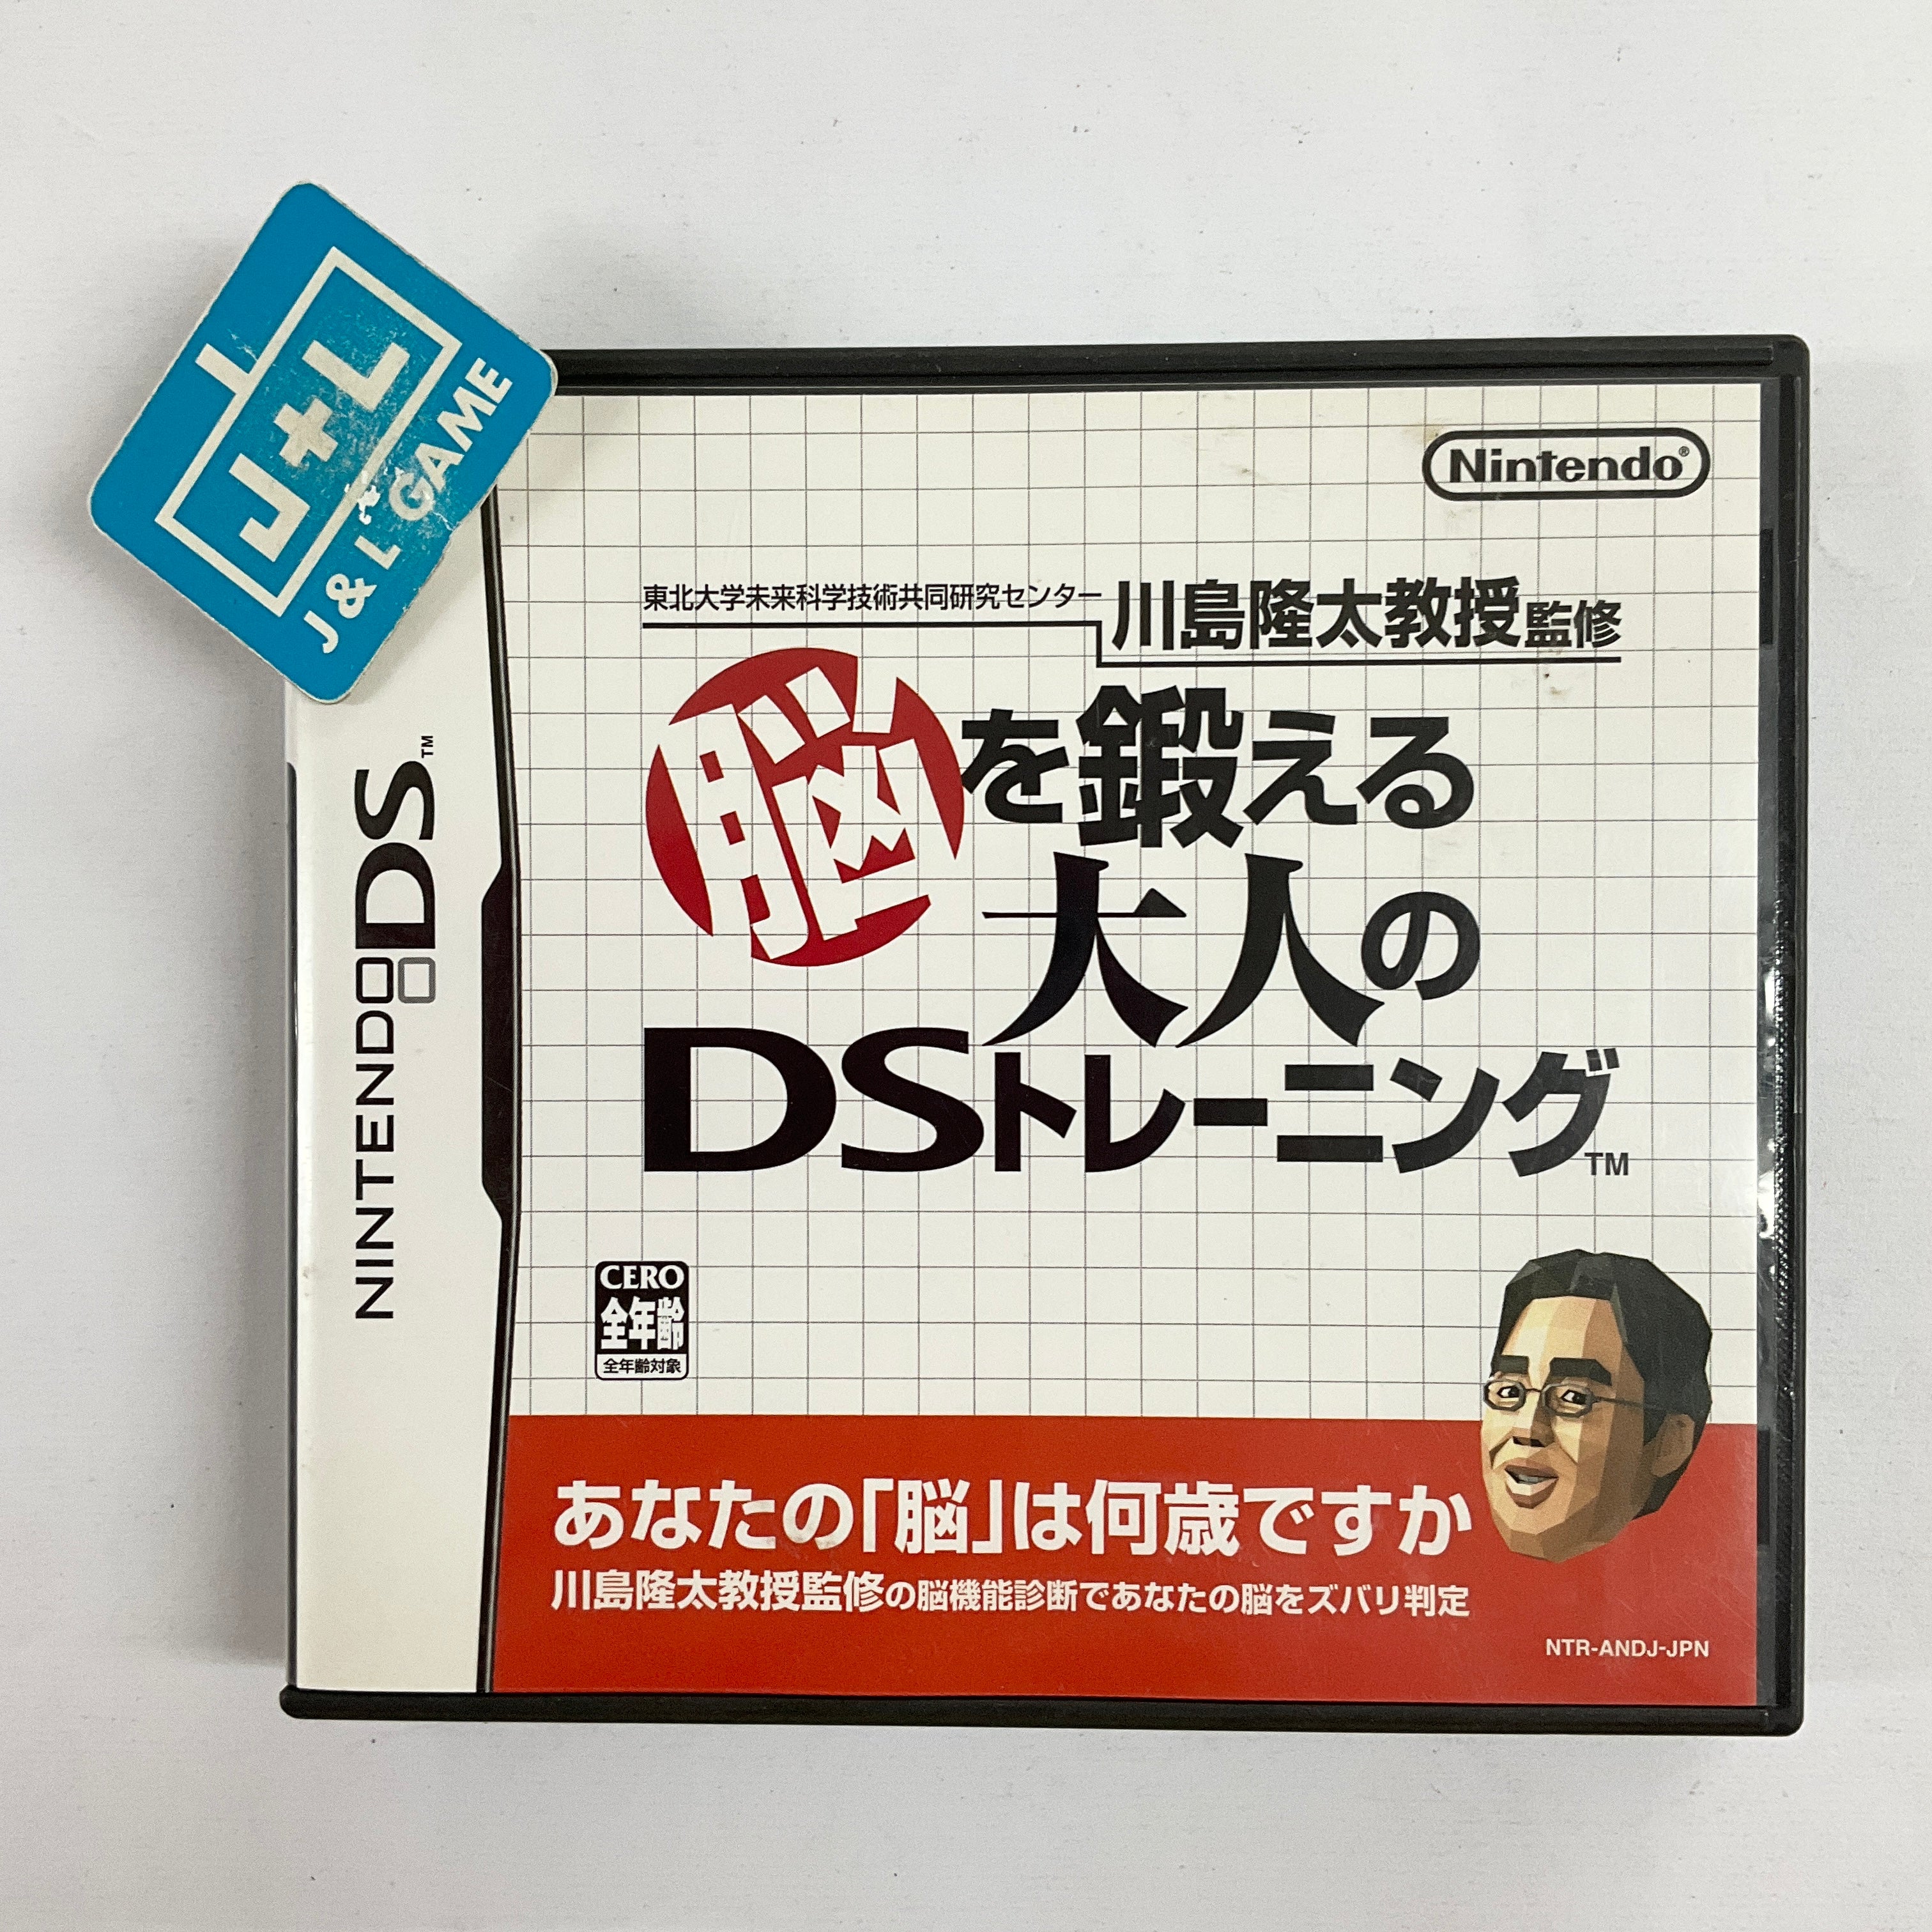 Brain Age: Train Your Brain in Minutes a Day! - (NDS) Nintendo DS [Pre-Owned] (Japanese Import) Video Games Nintendo   